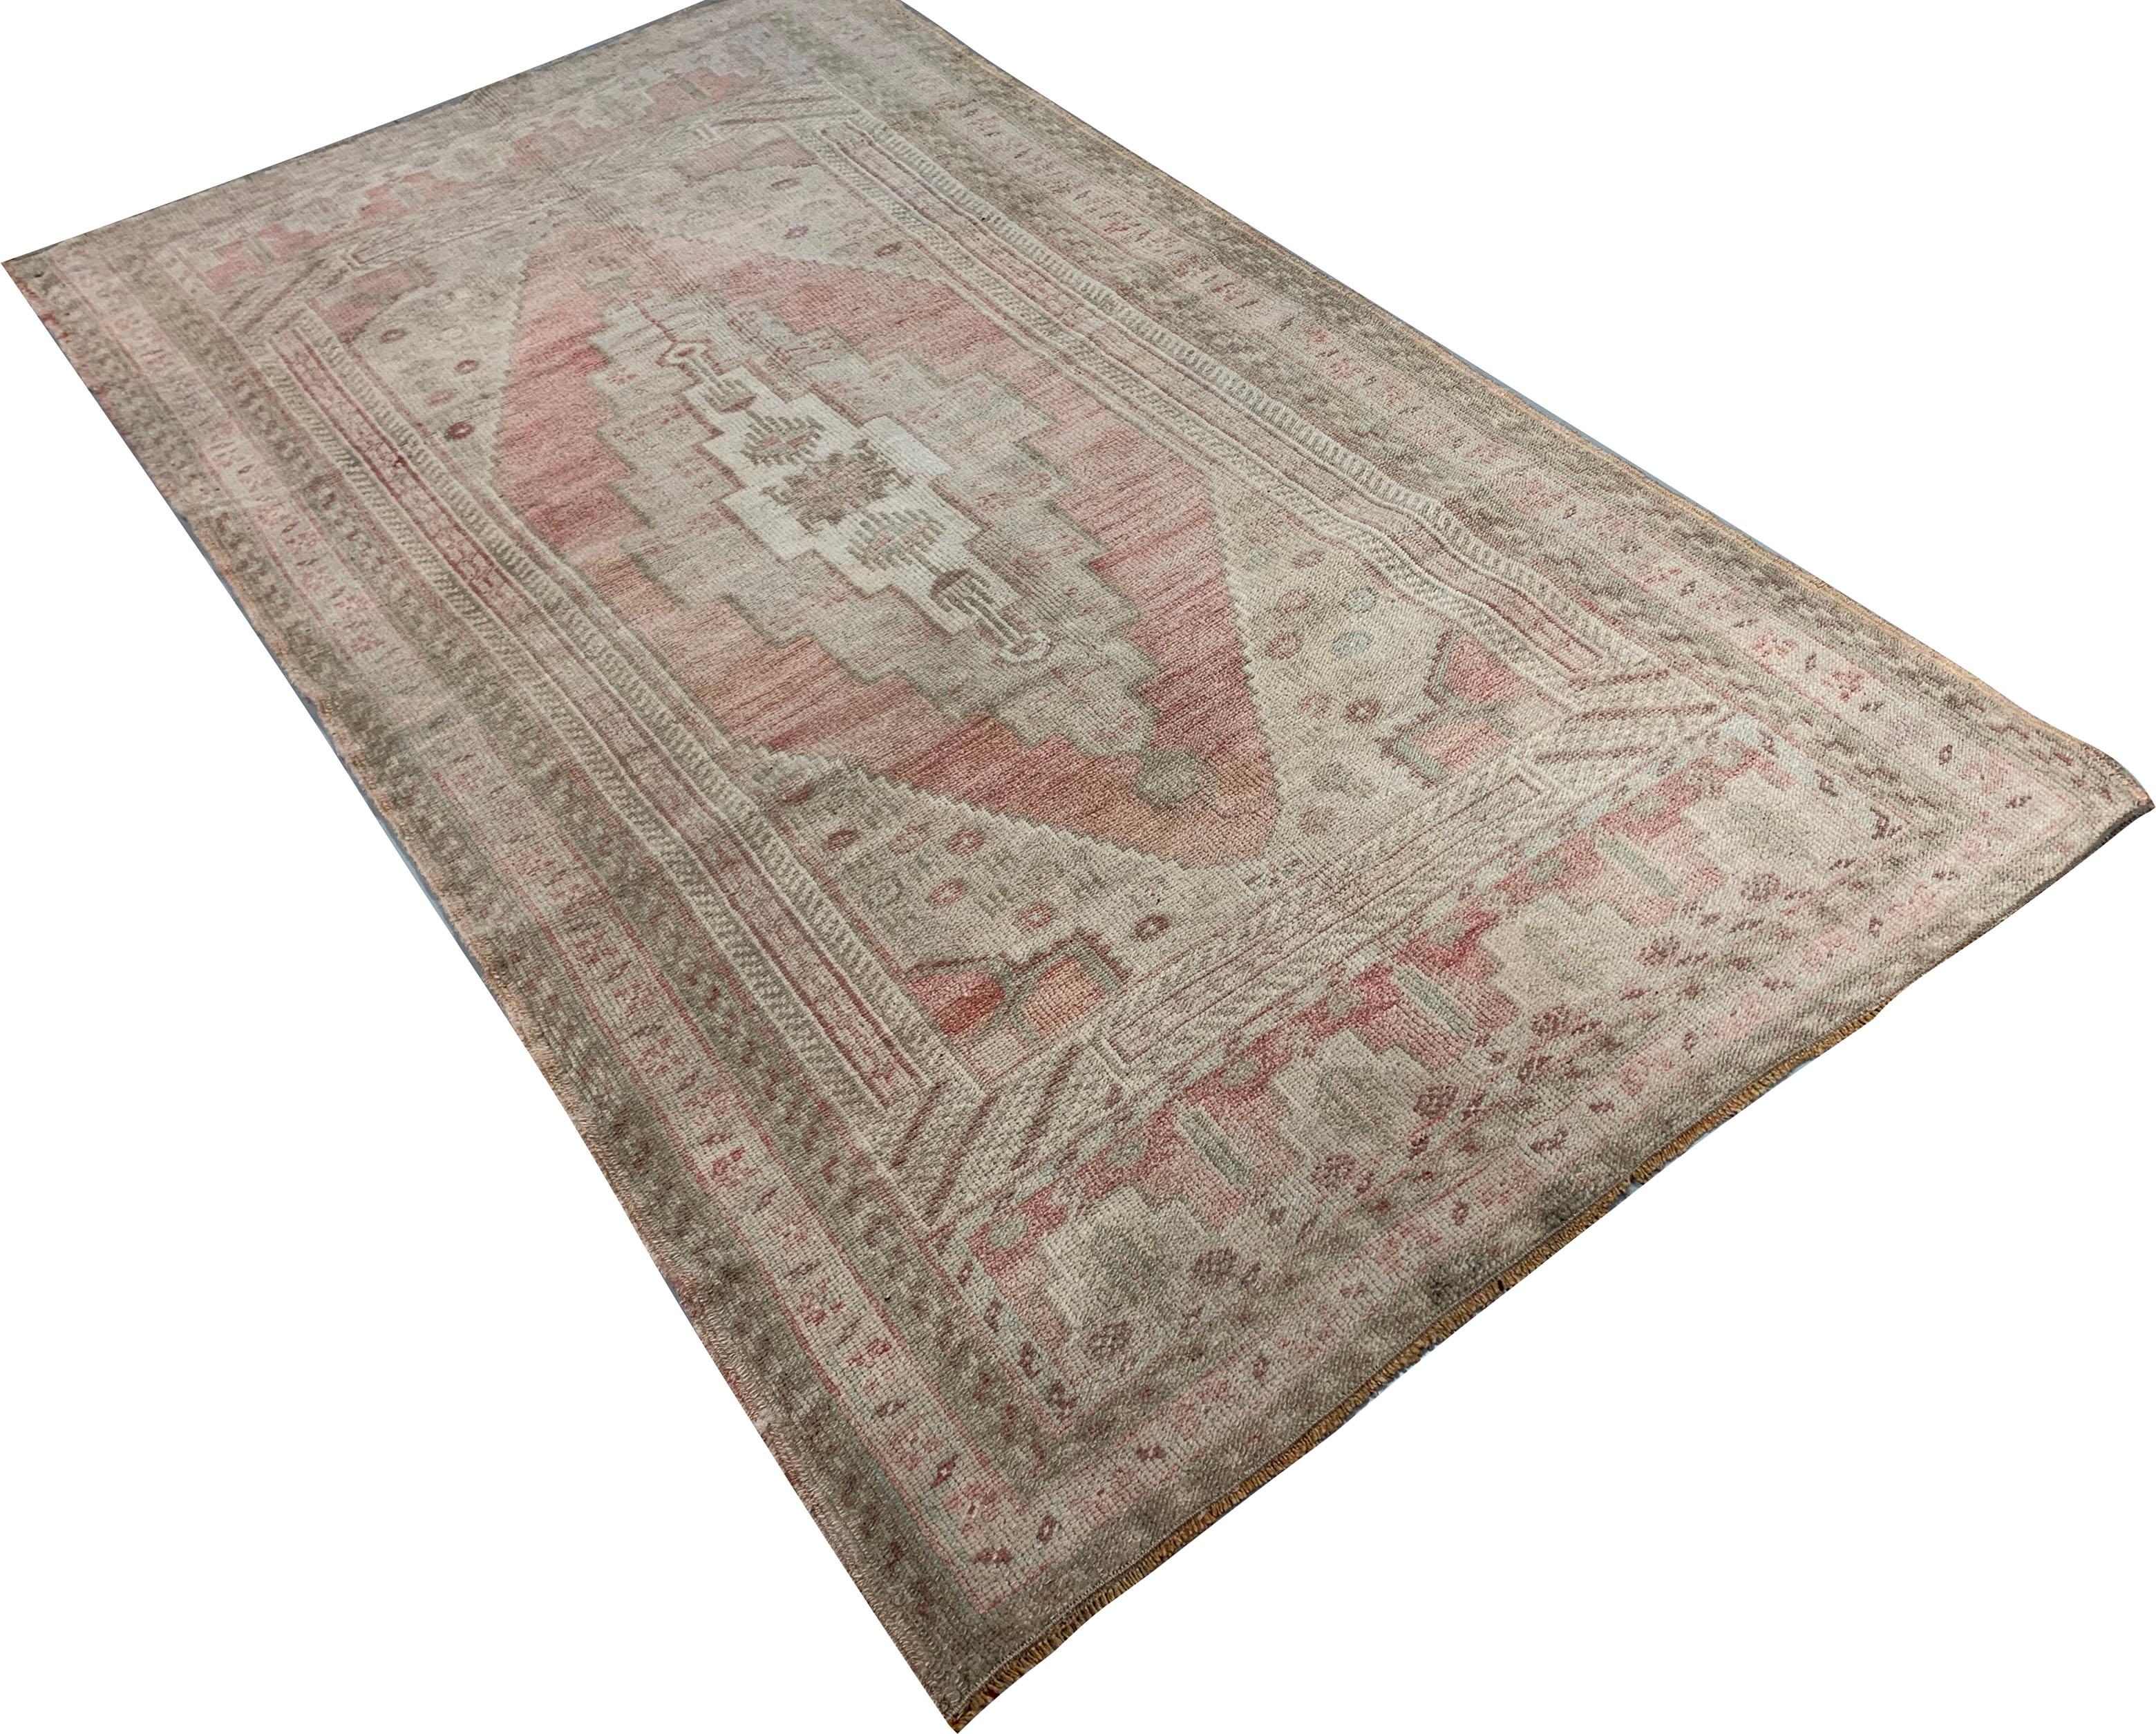 Vintage Turkish Oushak rug runner, 3'4' x 6'1'. Oushak's are known for their soft palettes combined with eccentric drawing. Oushak in western Turkey has the longest continuous rug weaving history, stretching back at least to the mid-fifteenth